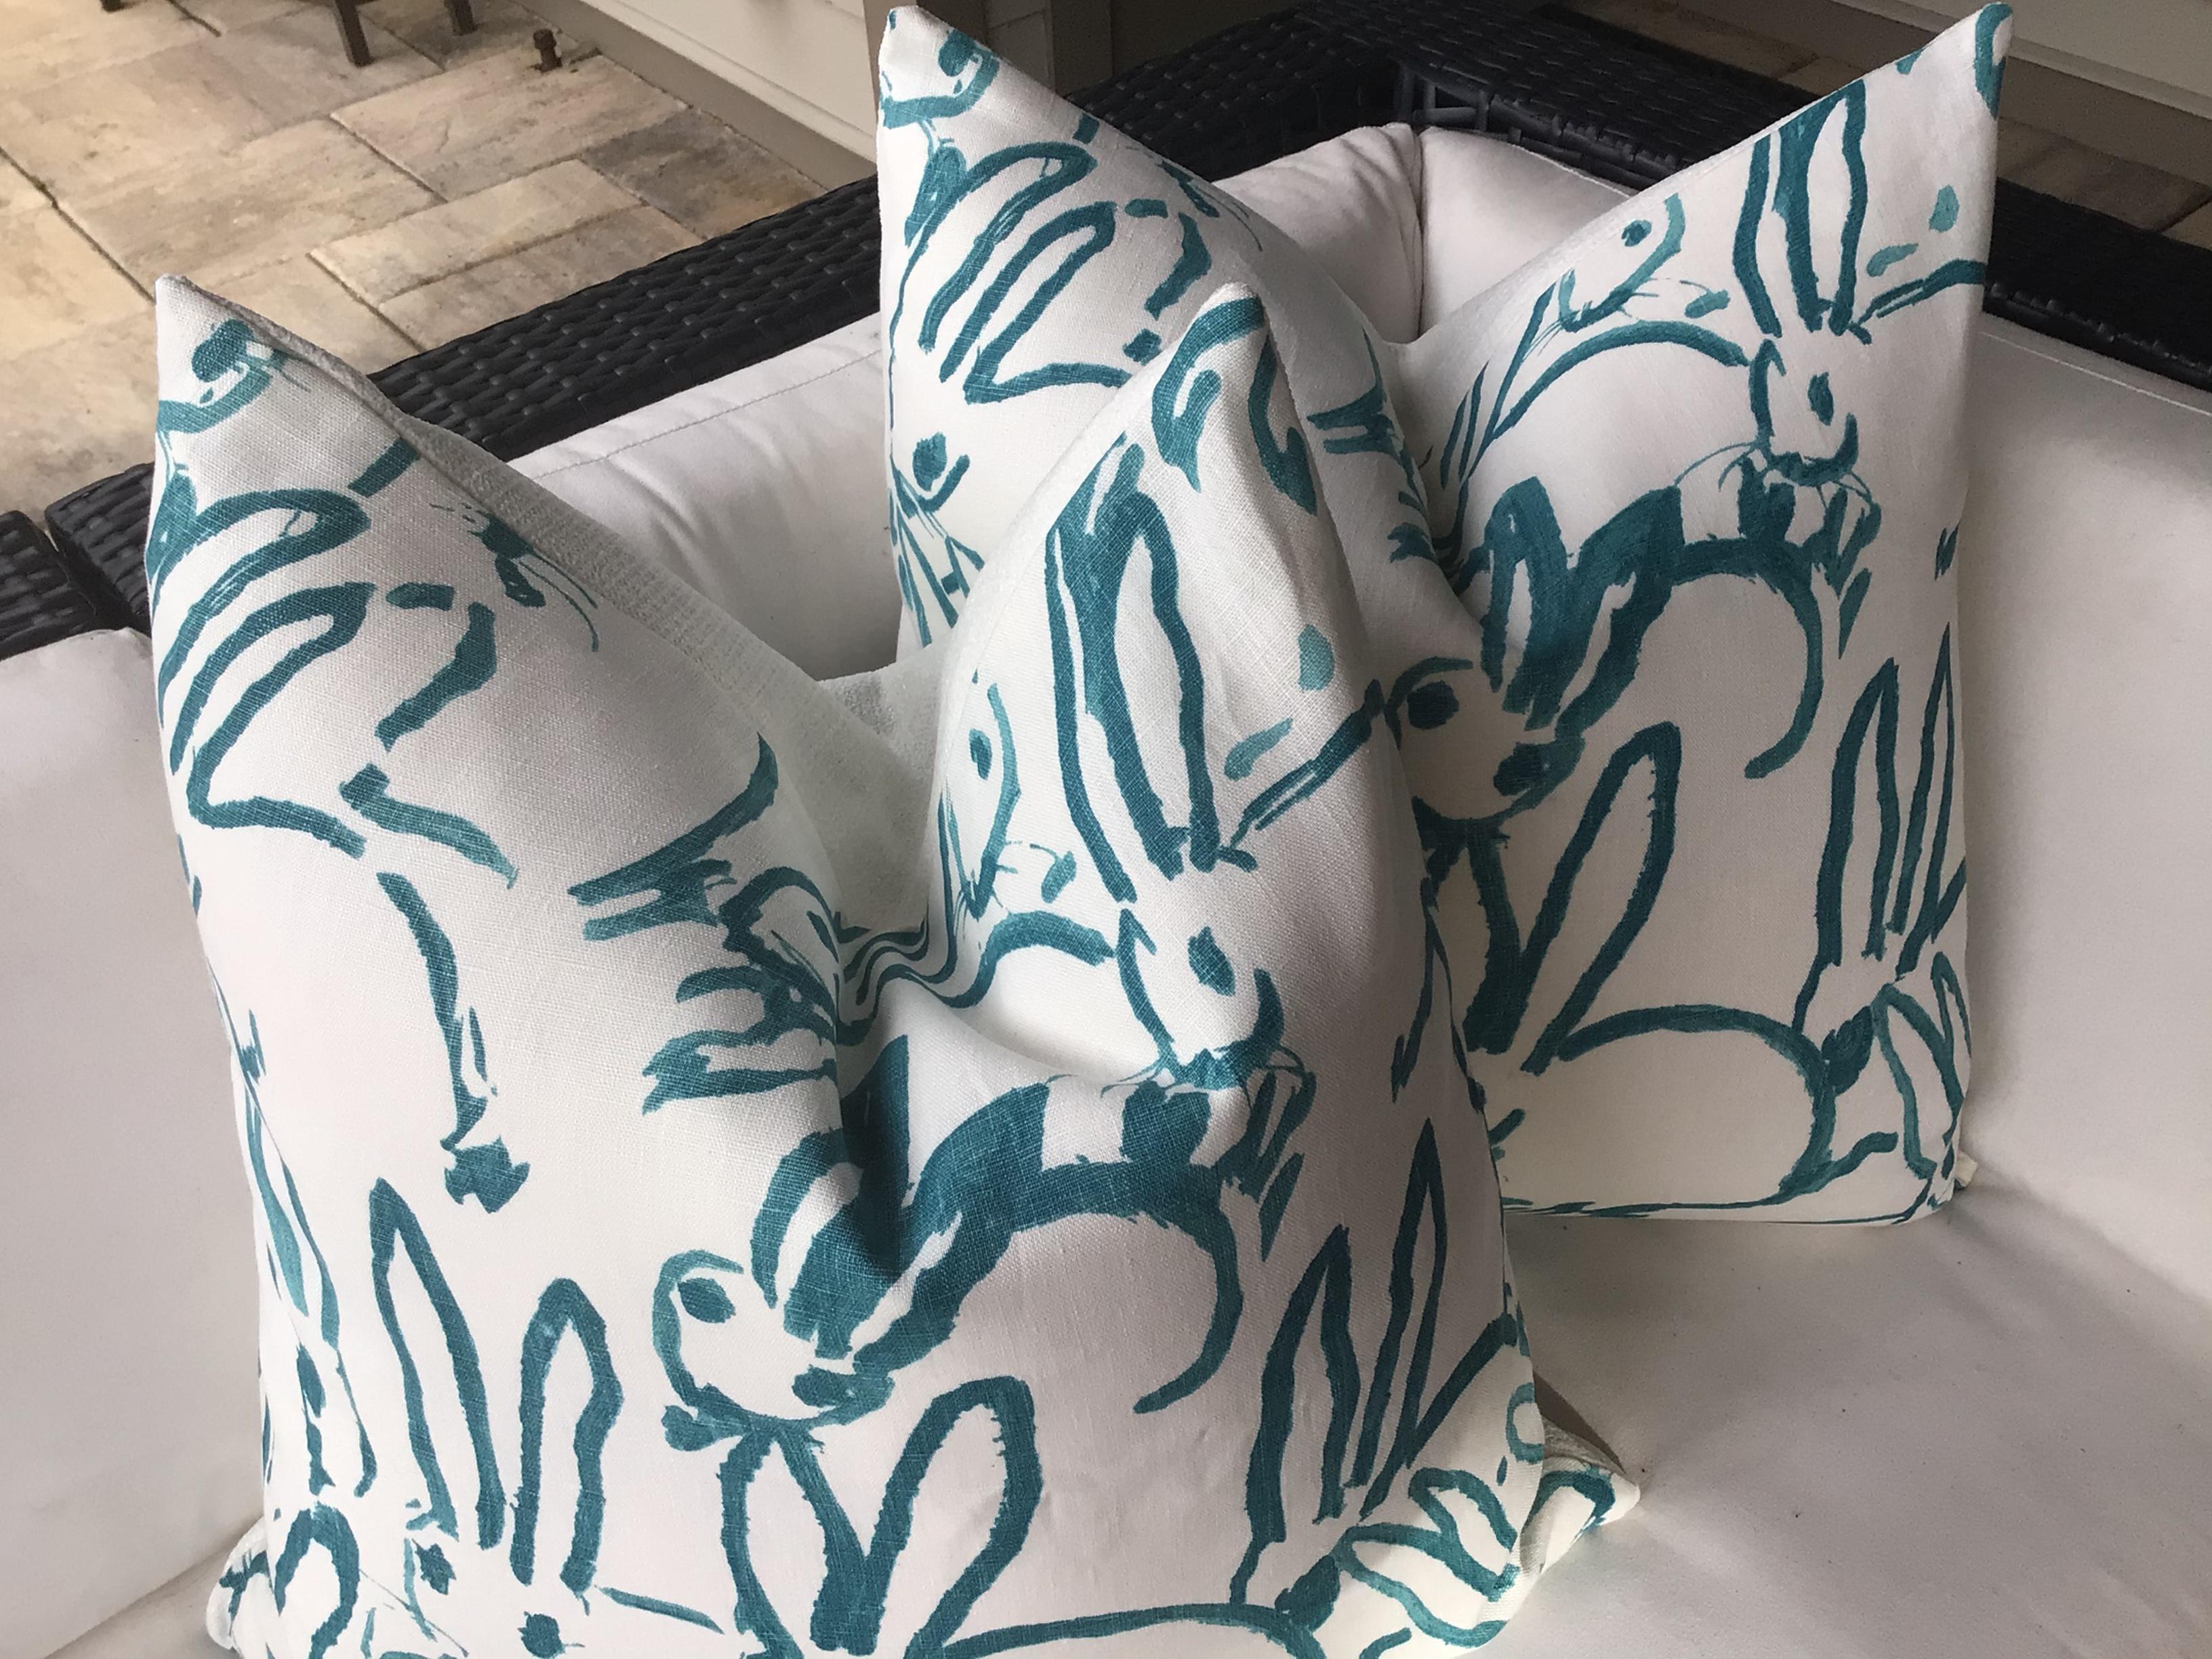 We're obsessed with this happy fabric - in all colorways and incarnations! From Groundworks by Lee Jofa comes this charming yet utterly sophisticated printed linen fabric. 